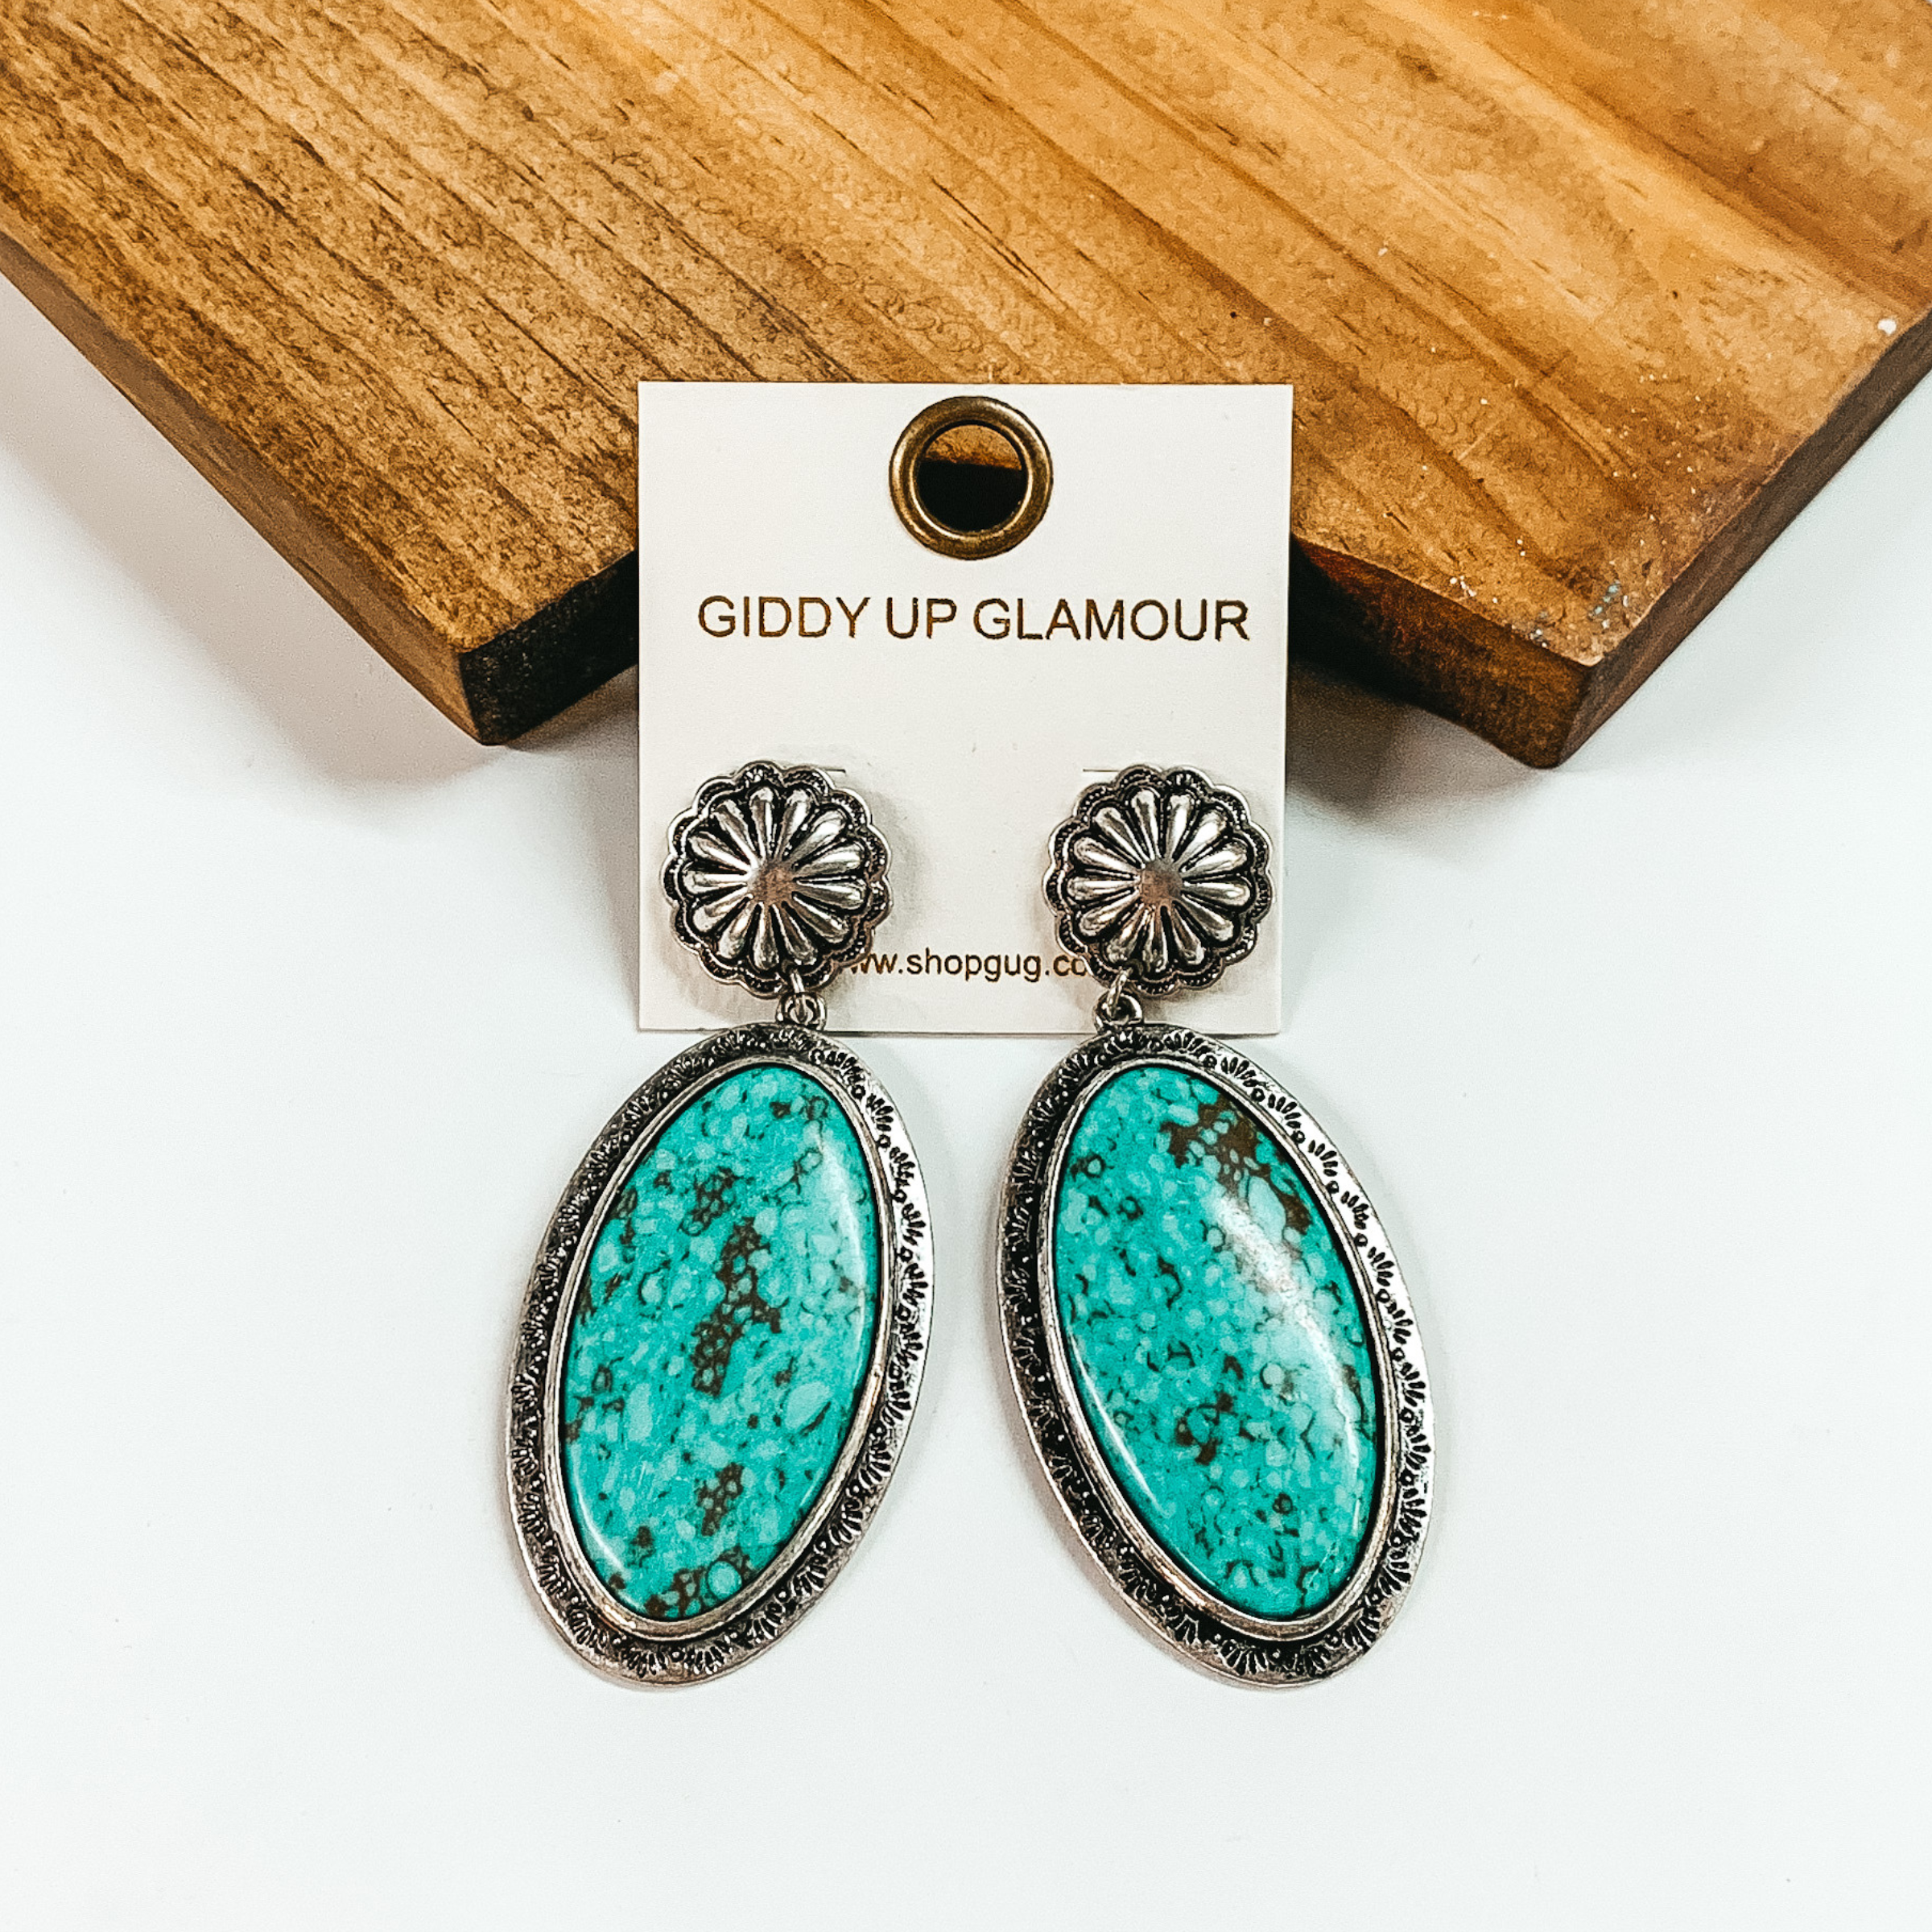 Silver, circle concho earrings with an oval drop. The oval drop is a turquoise stone with a silver outline. These earrings are pictured in front of a brown block on a white background. 